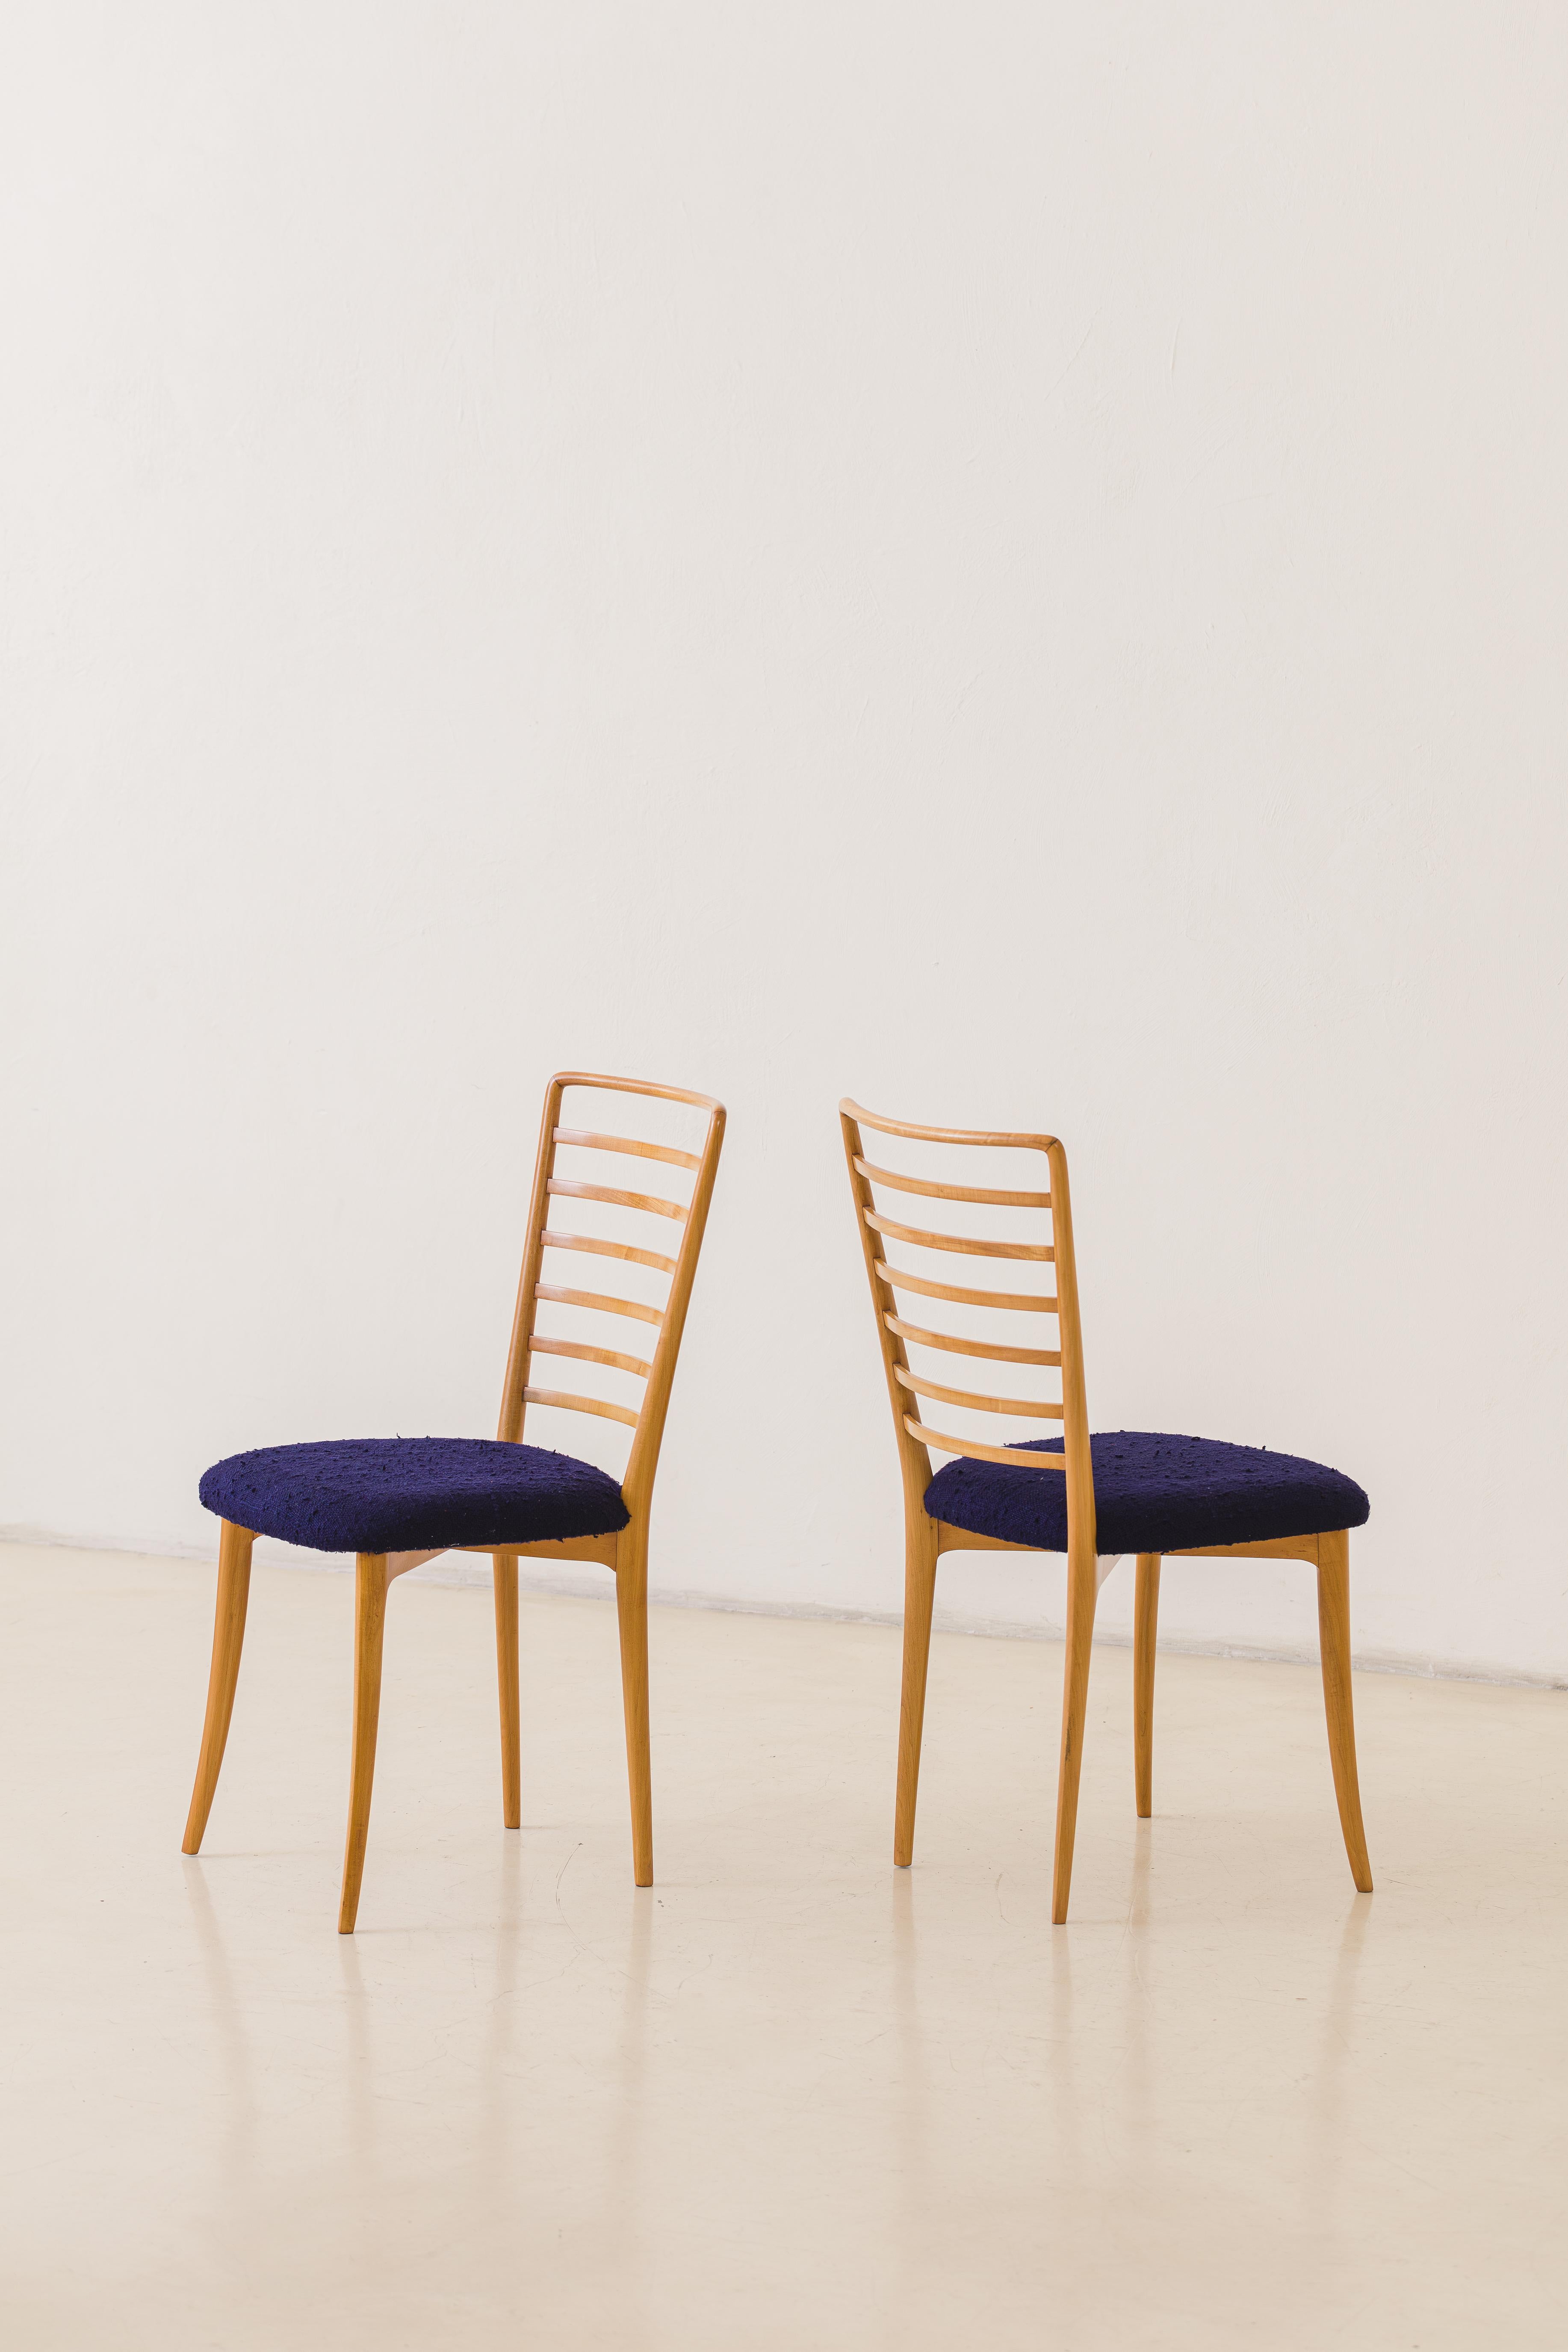 Joaquim Tenreiro Dining Chairs, Solid Wood and Fabric, MidCentury, Brazil, 1950s In Good Condition For Sale In New York, NY